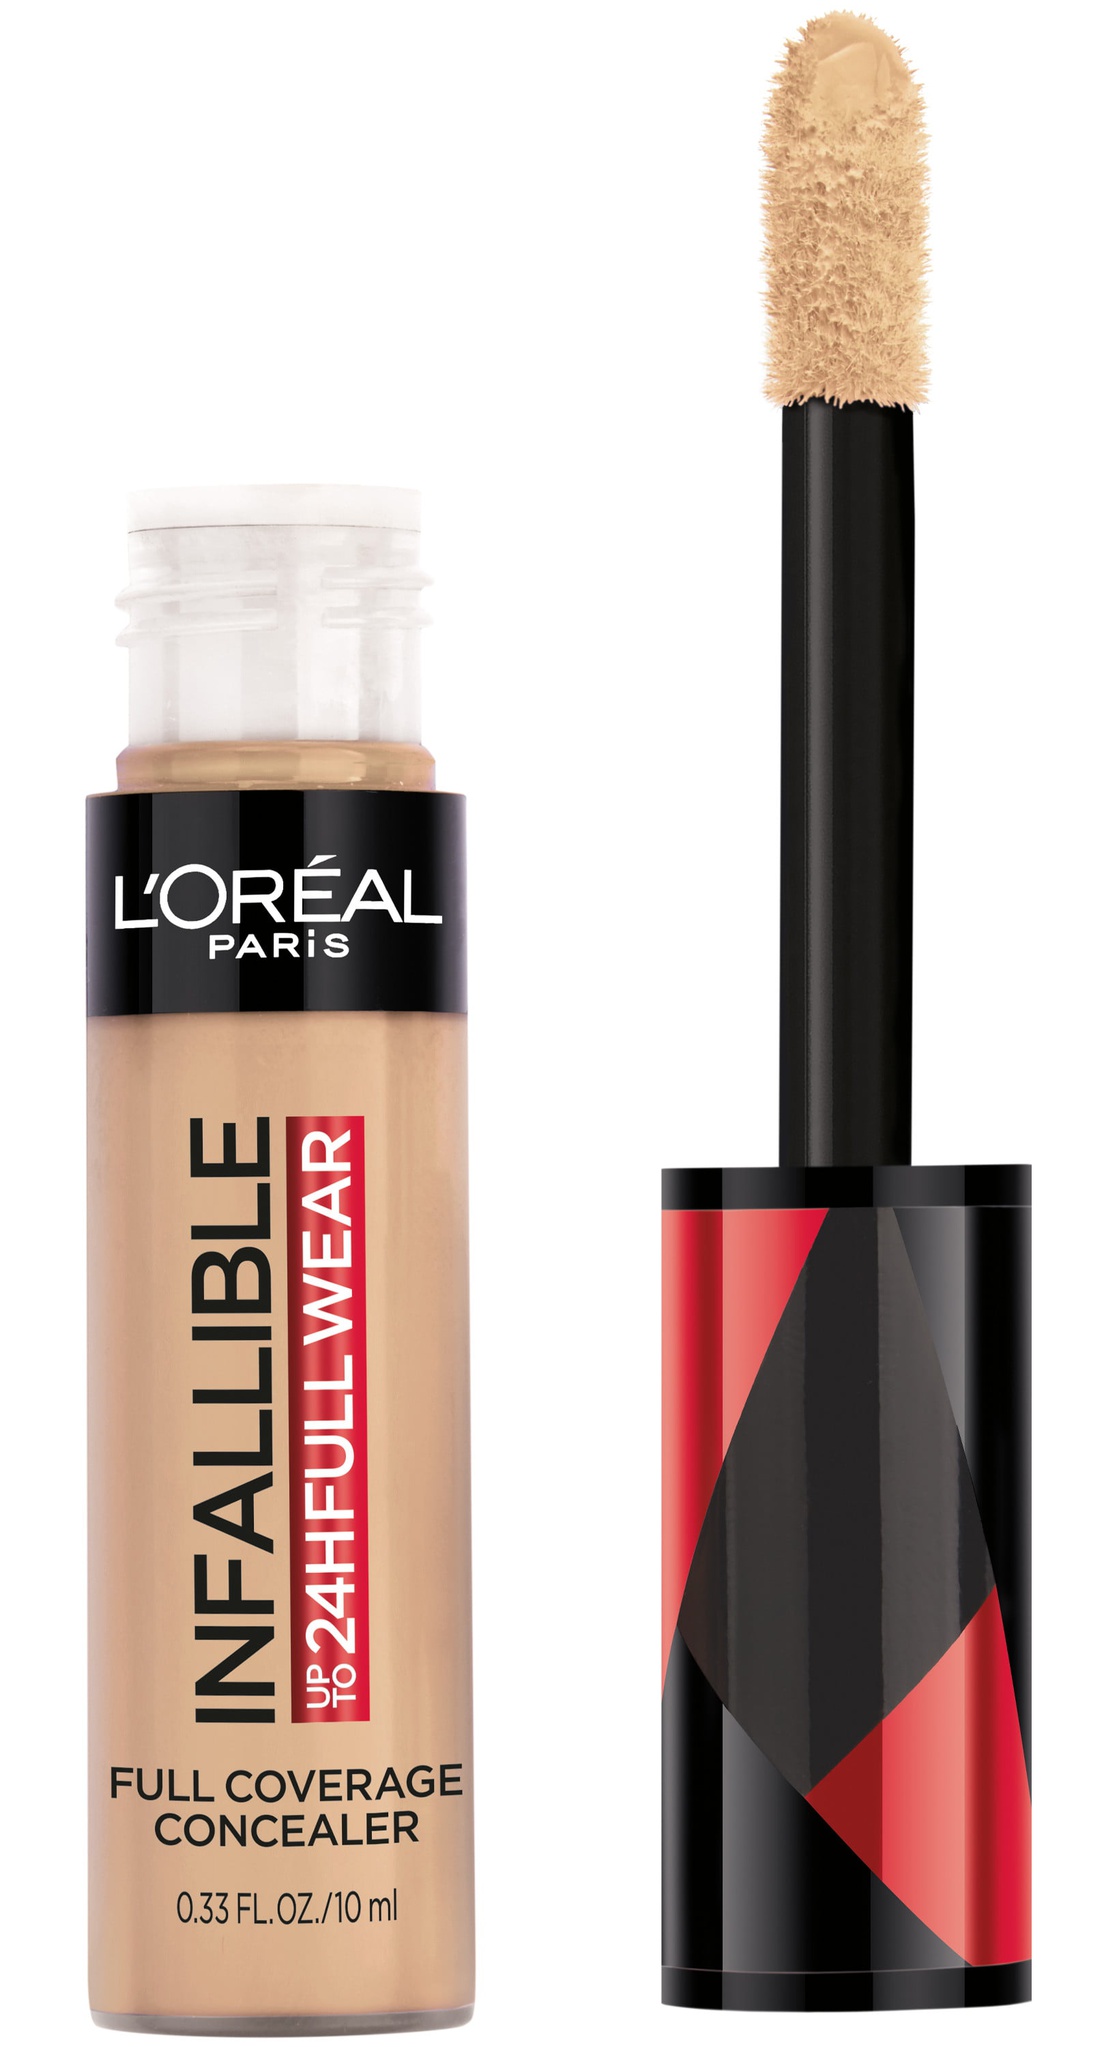 L'Oreal Infallible Full Wear Concealer Up To 24h Full Coverage